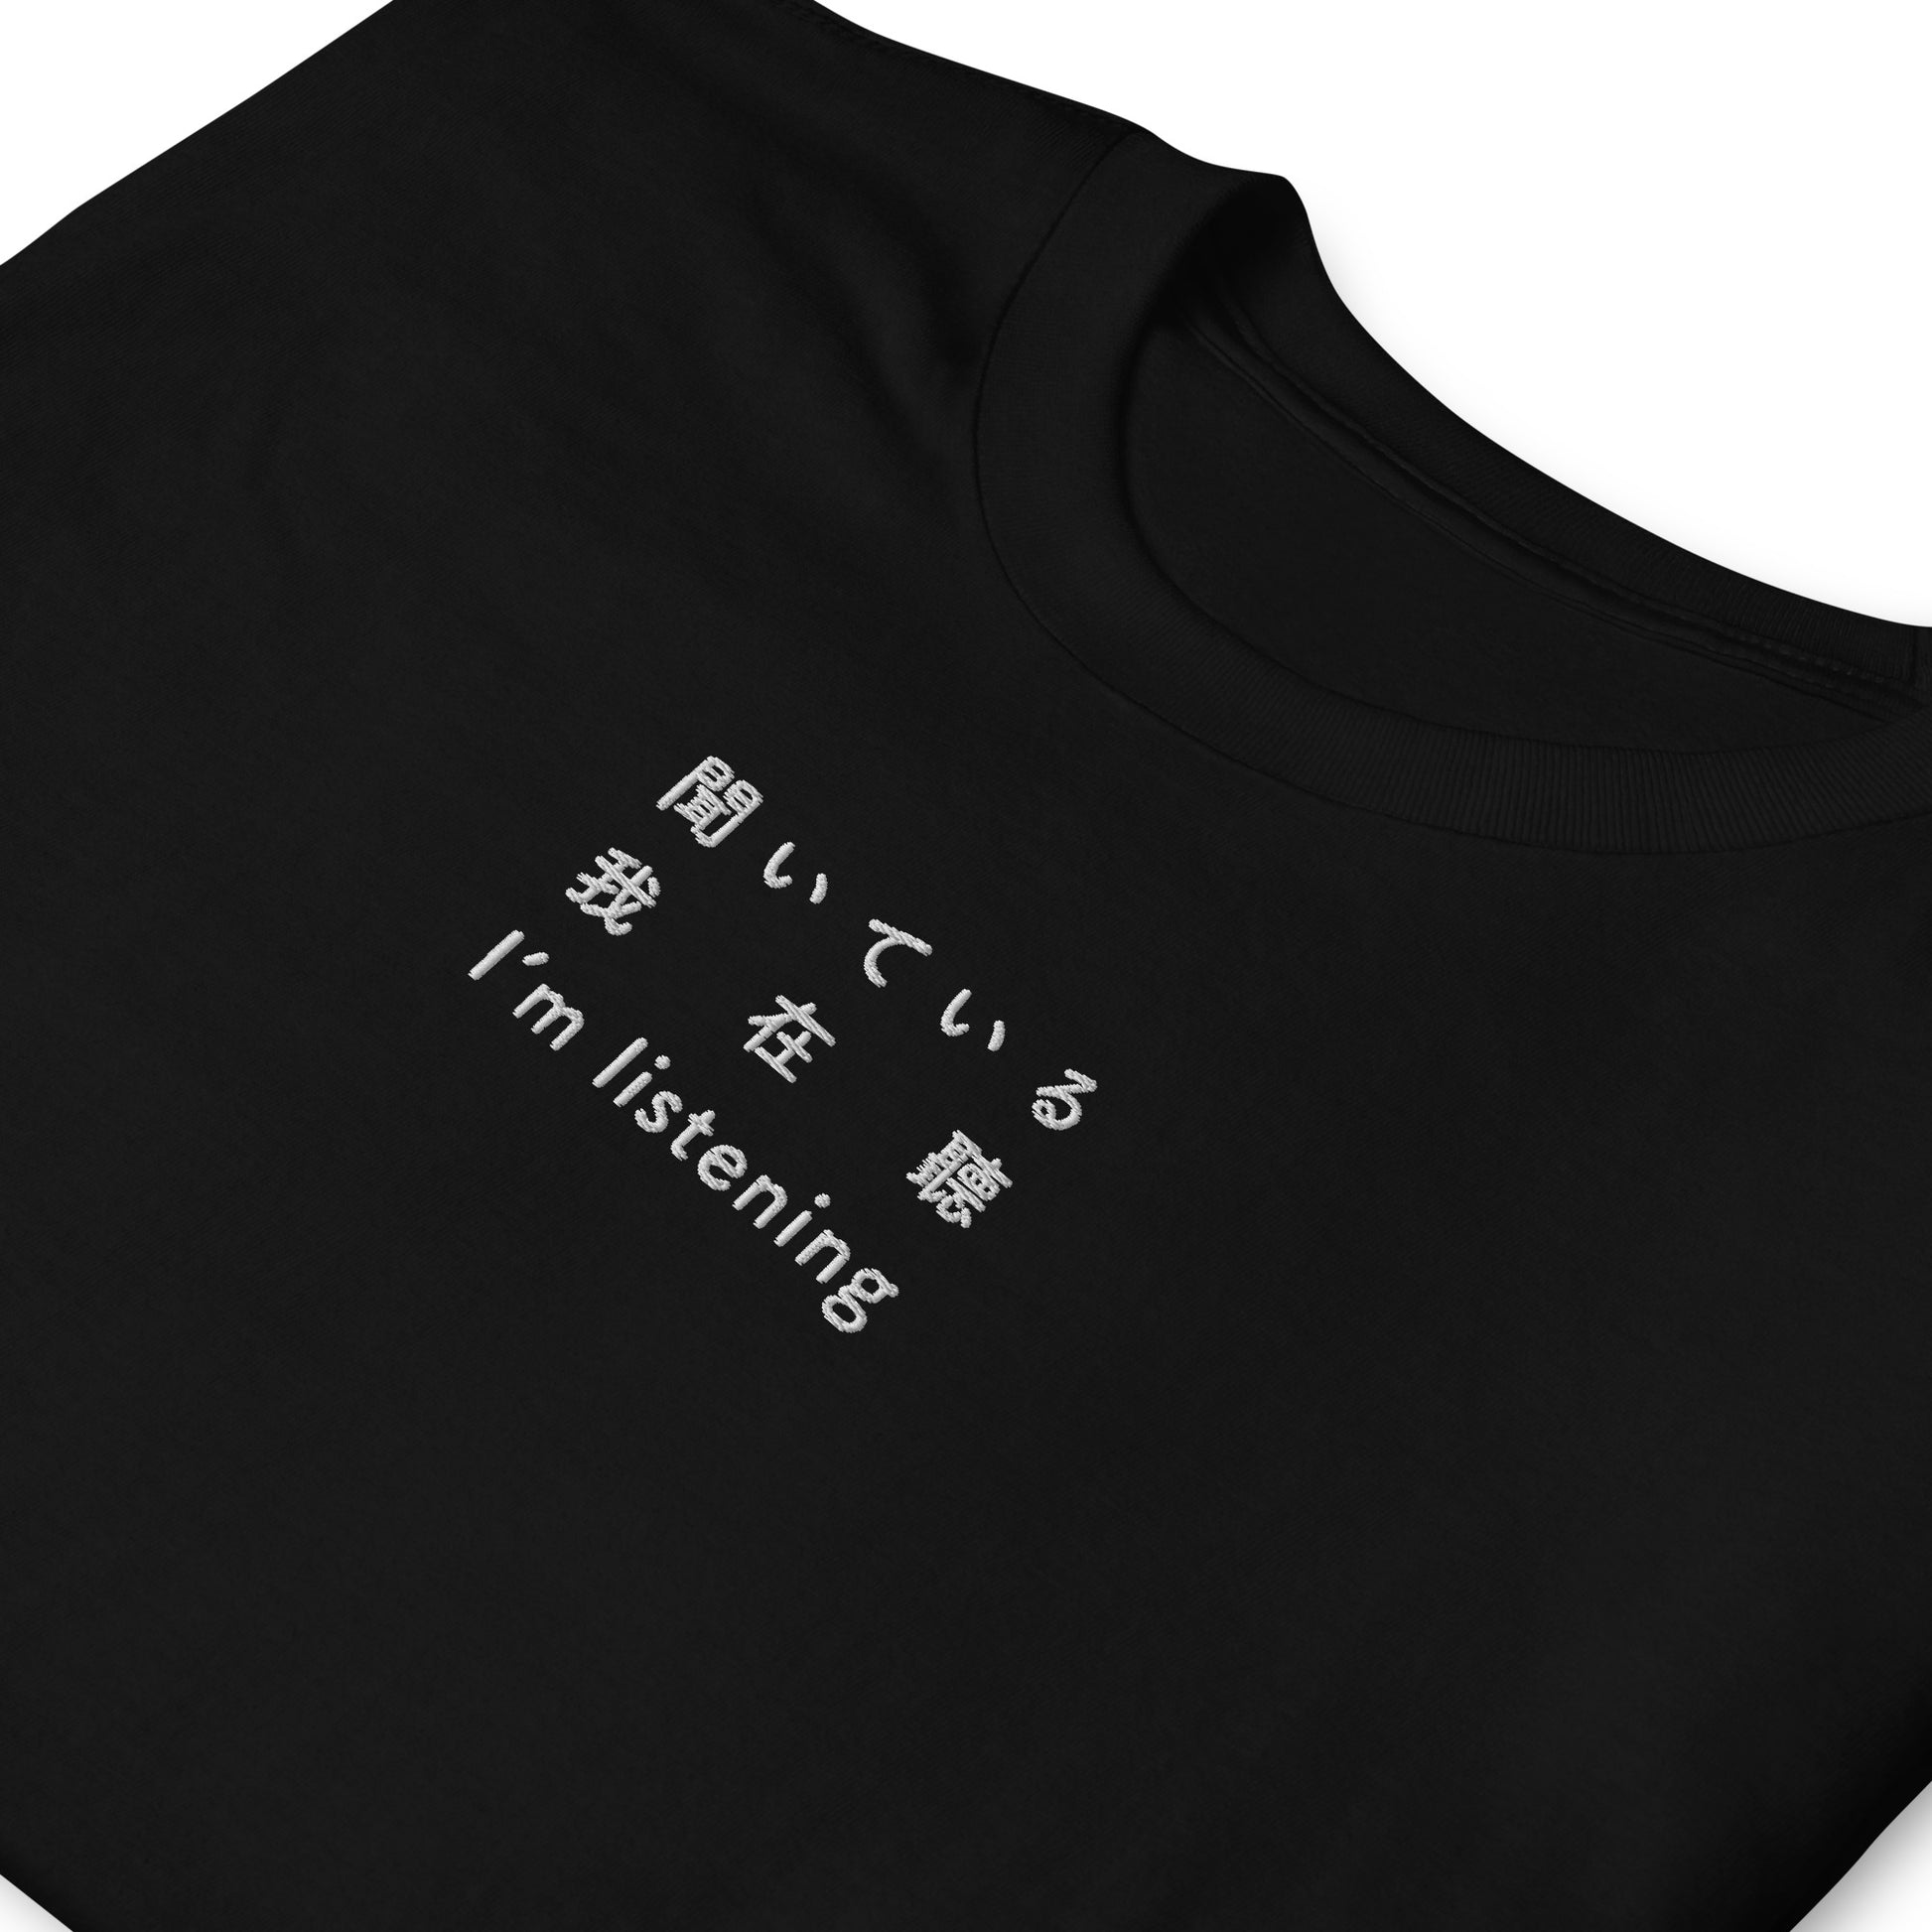 Black High Quality Tee - Front Design with an White Embroidery "I'm listening" in Japanese,Chinese and English